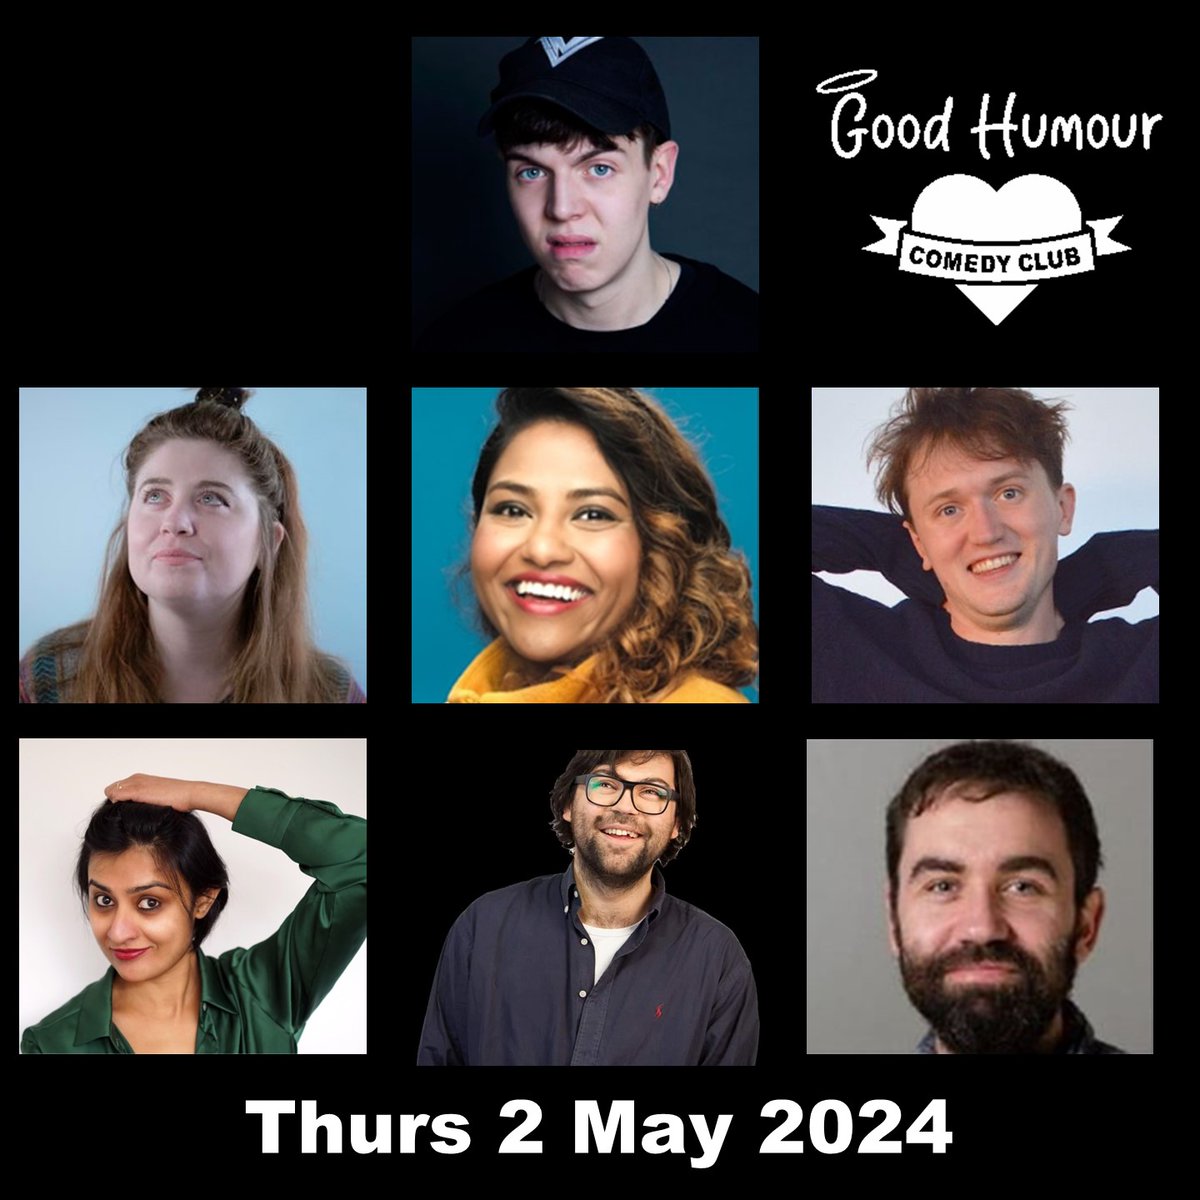 V excited about our next Good Humour fundraiser for @MedicalAidPal in Borough this Thursday. Featuring the incredible @_ednight headlining alongside six of best new acts on the circuit. Please come! You can reserve your seat for free here eventbrite.co.uk/e/885400335237